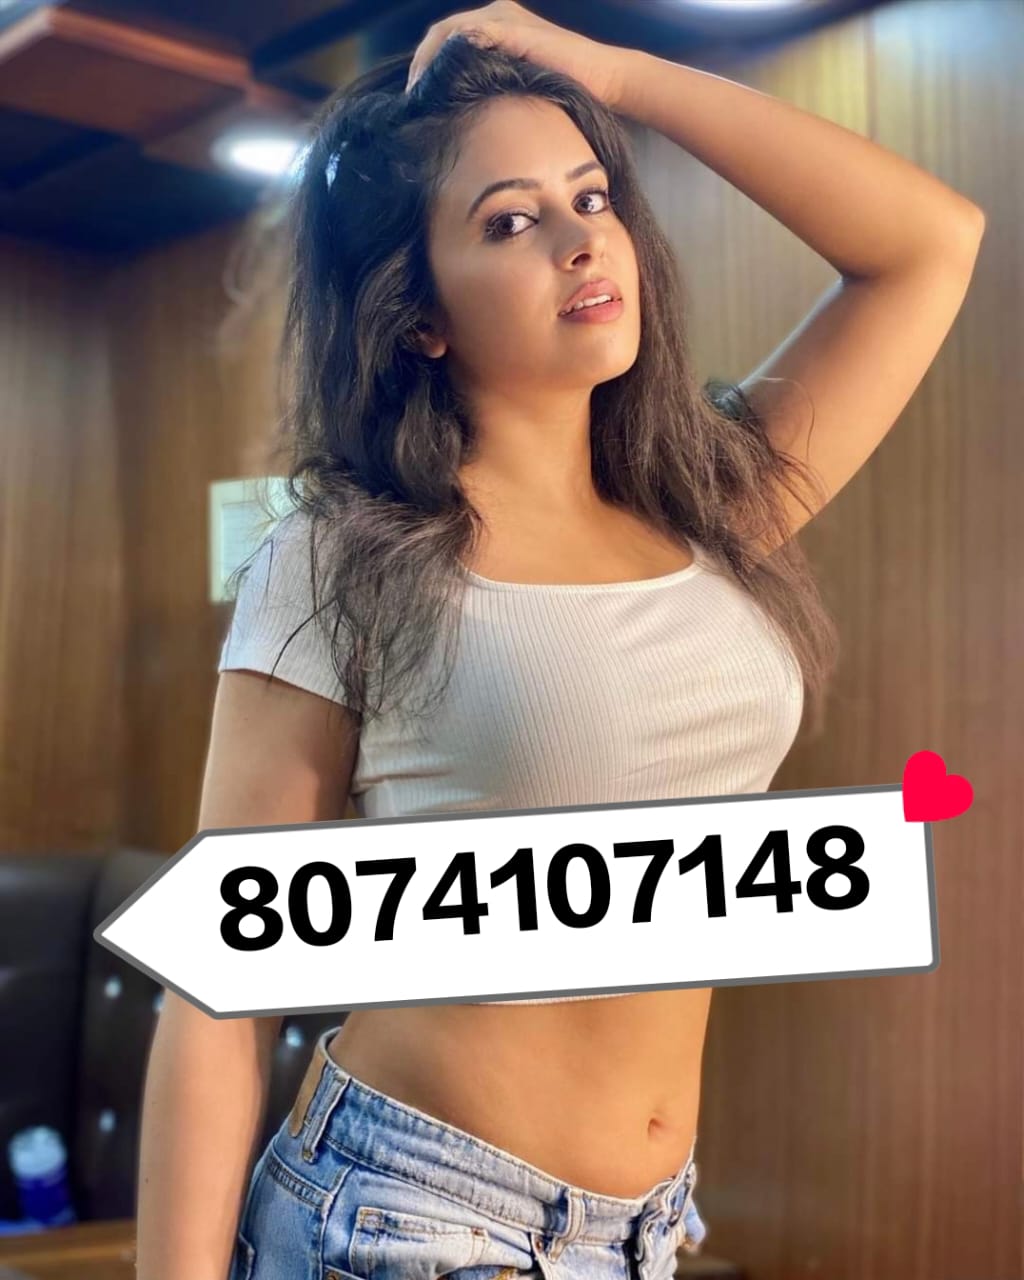 Panvel VIP escort call girls genuine service centre anytime without co